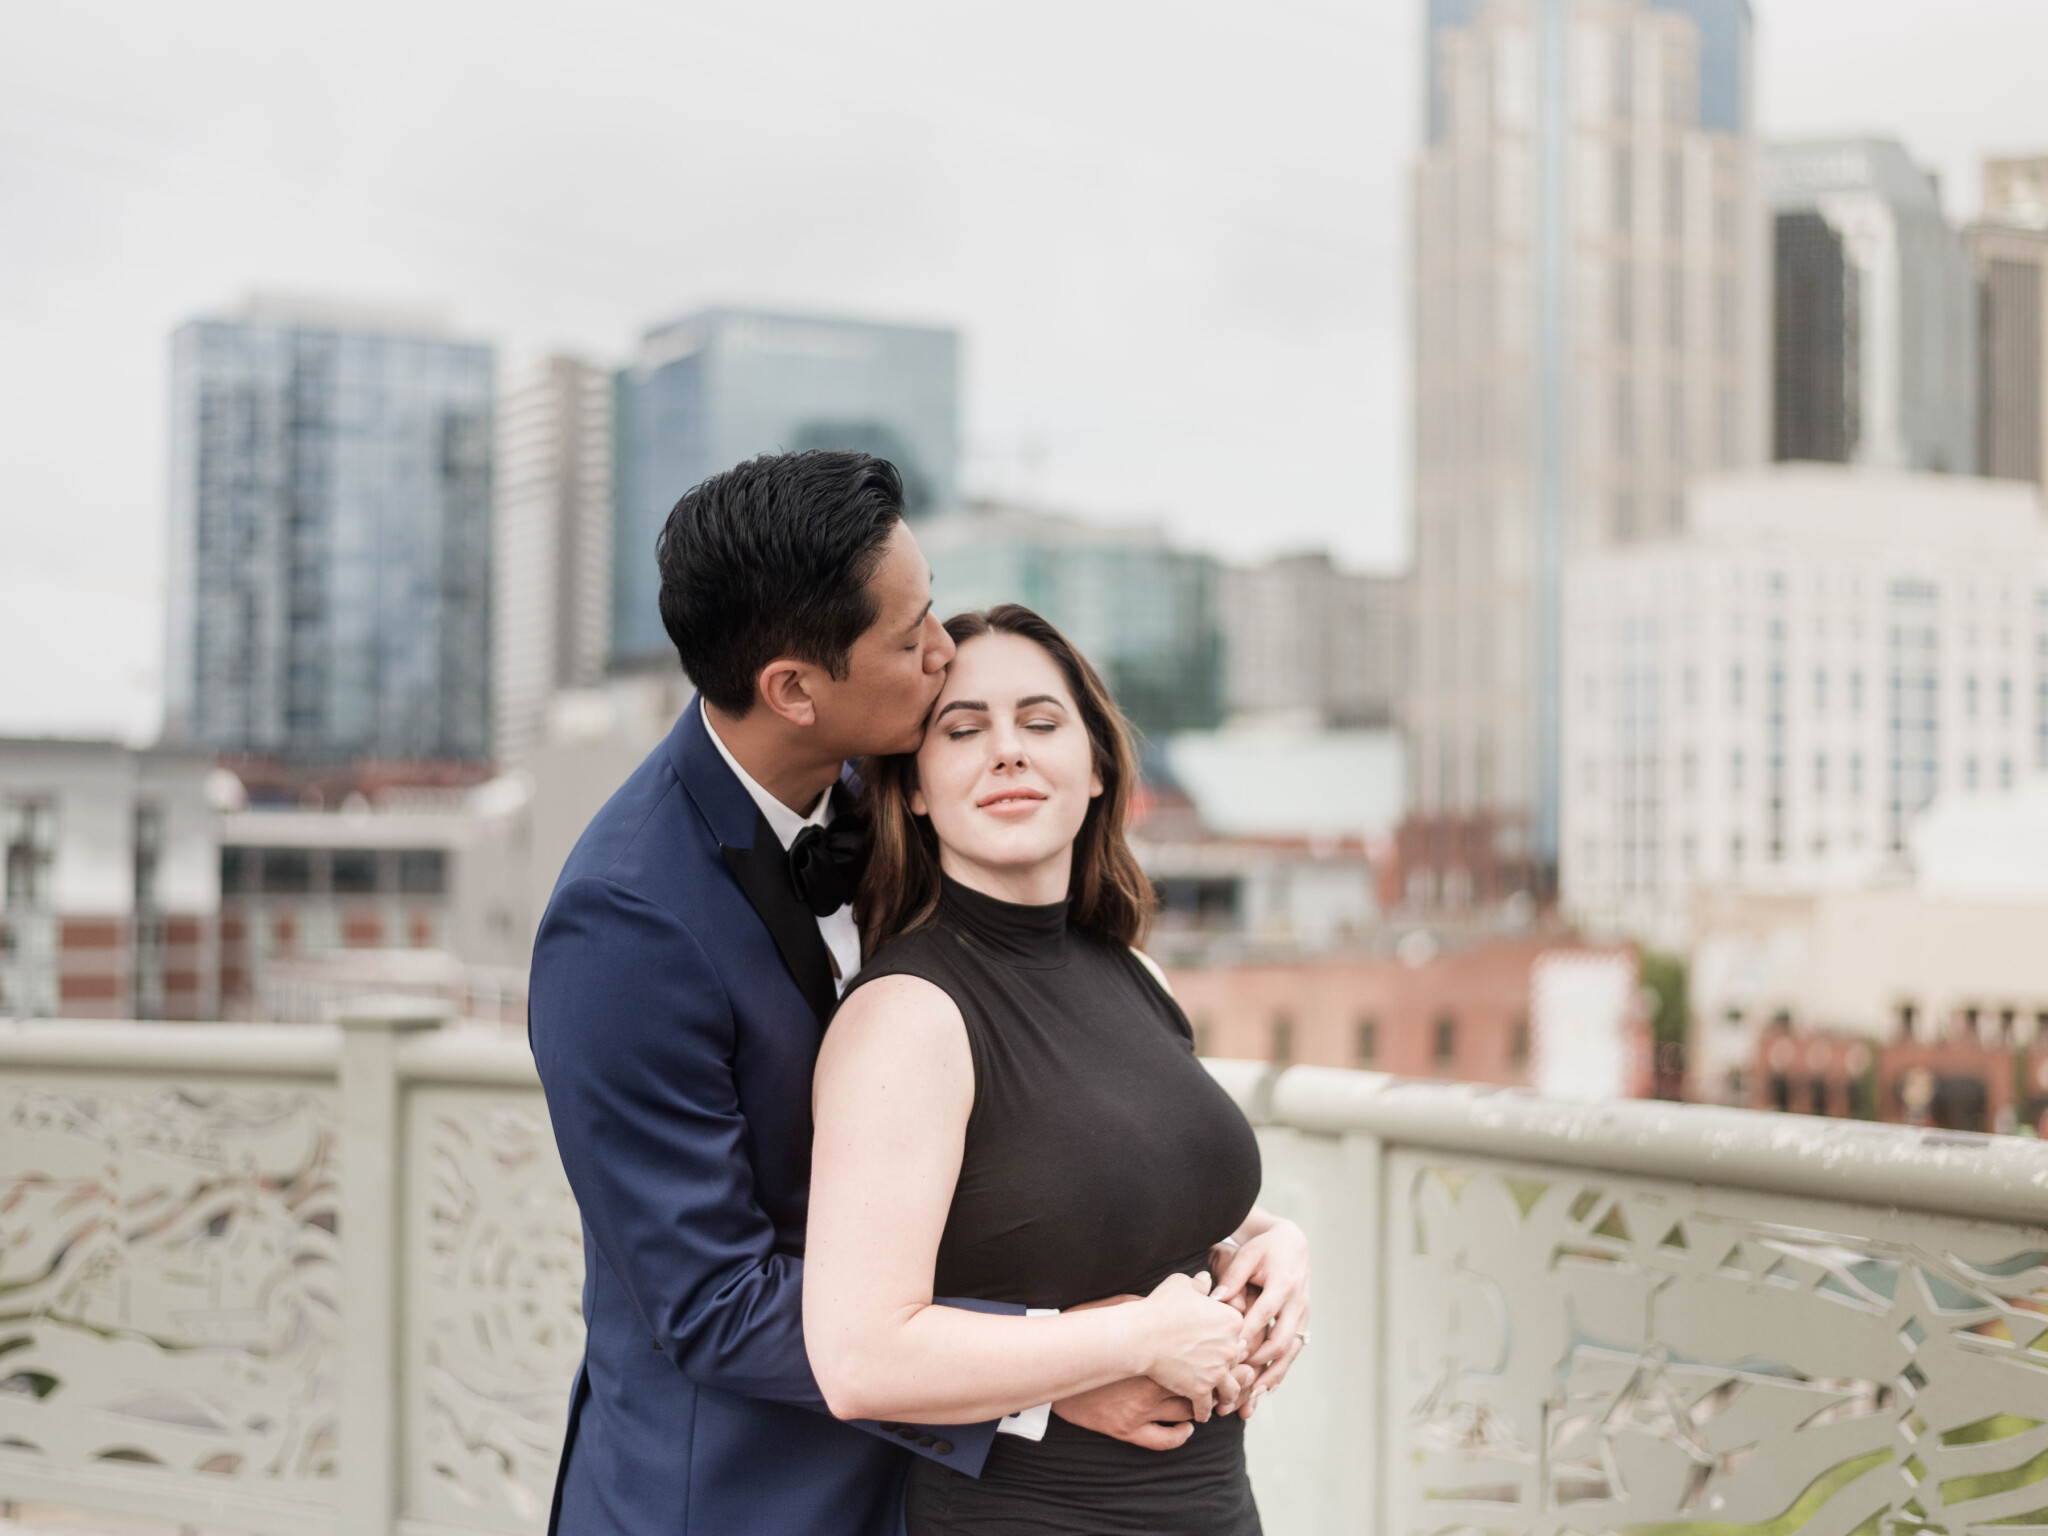 Luxe Downtown Nashville Engagement Session Inspired by Victoria & David Beckham